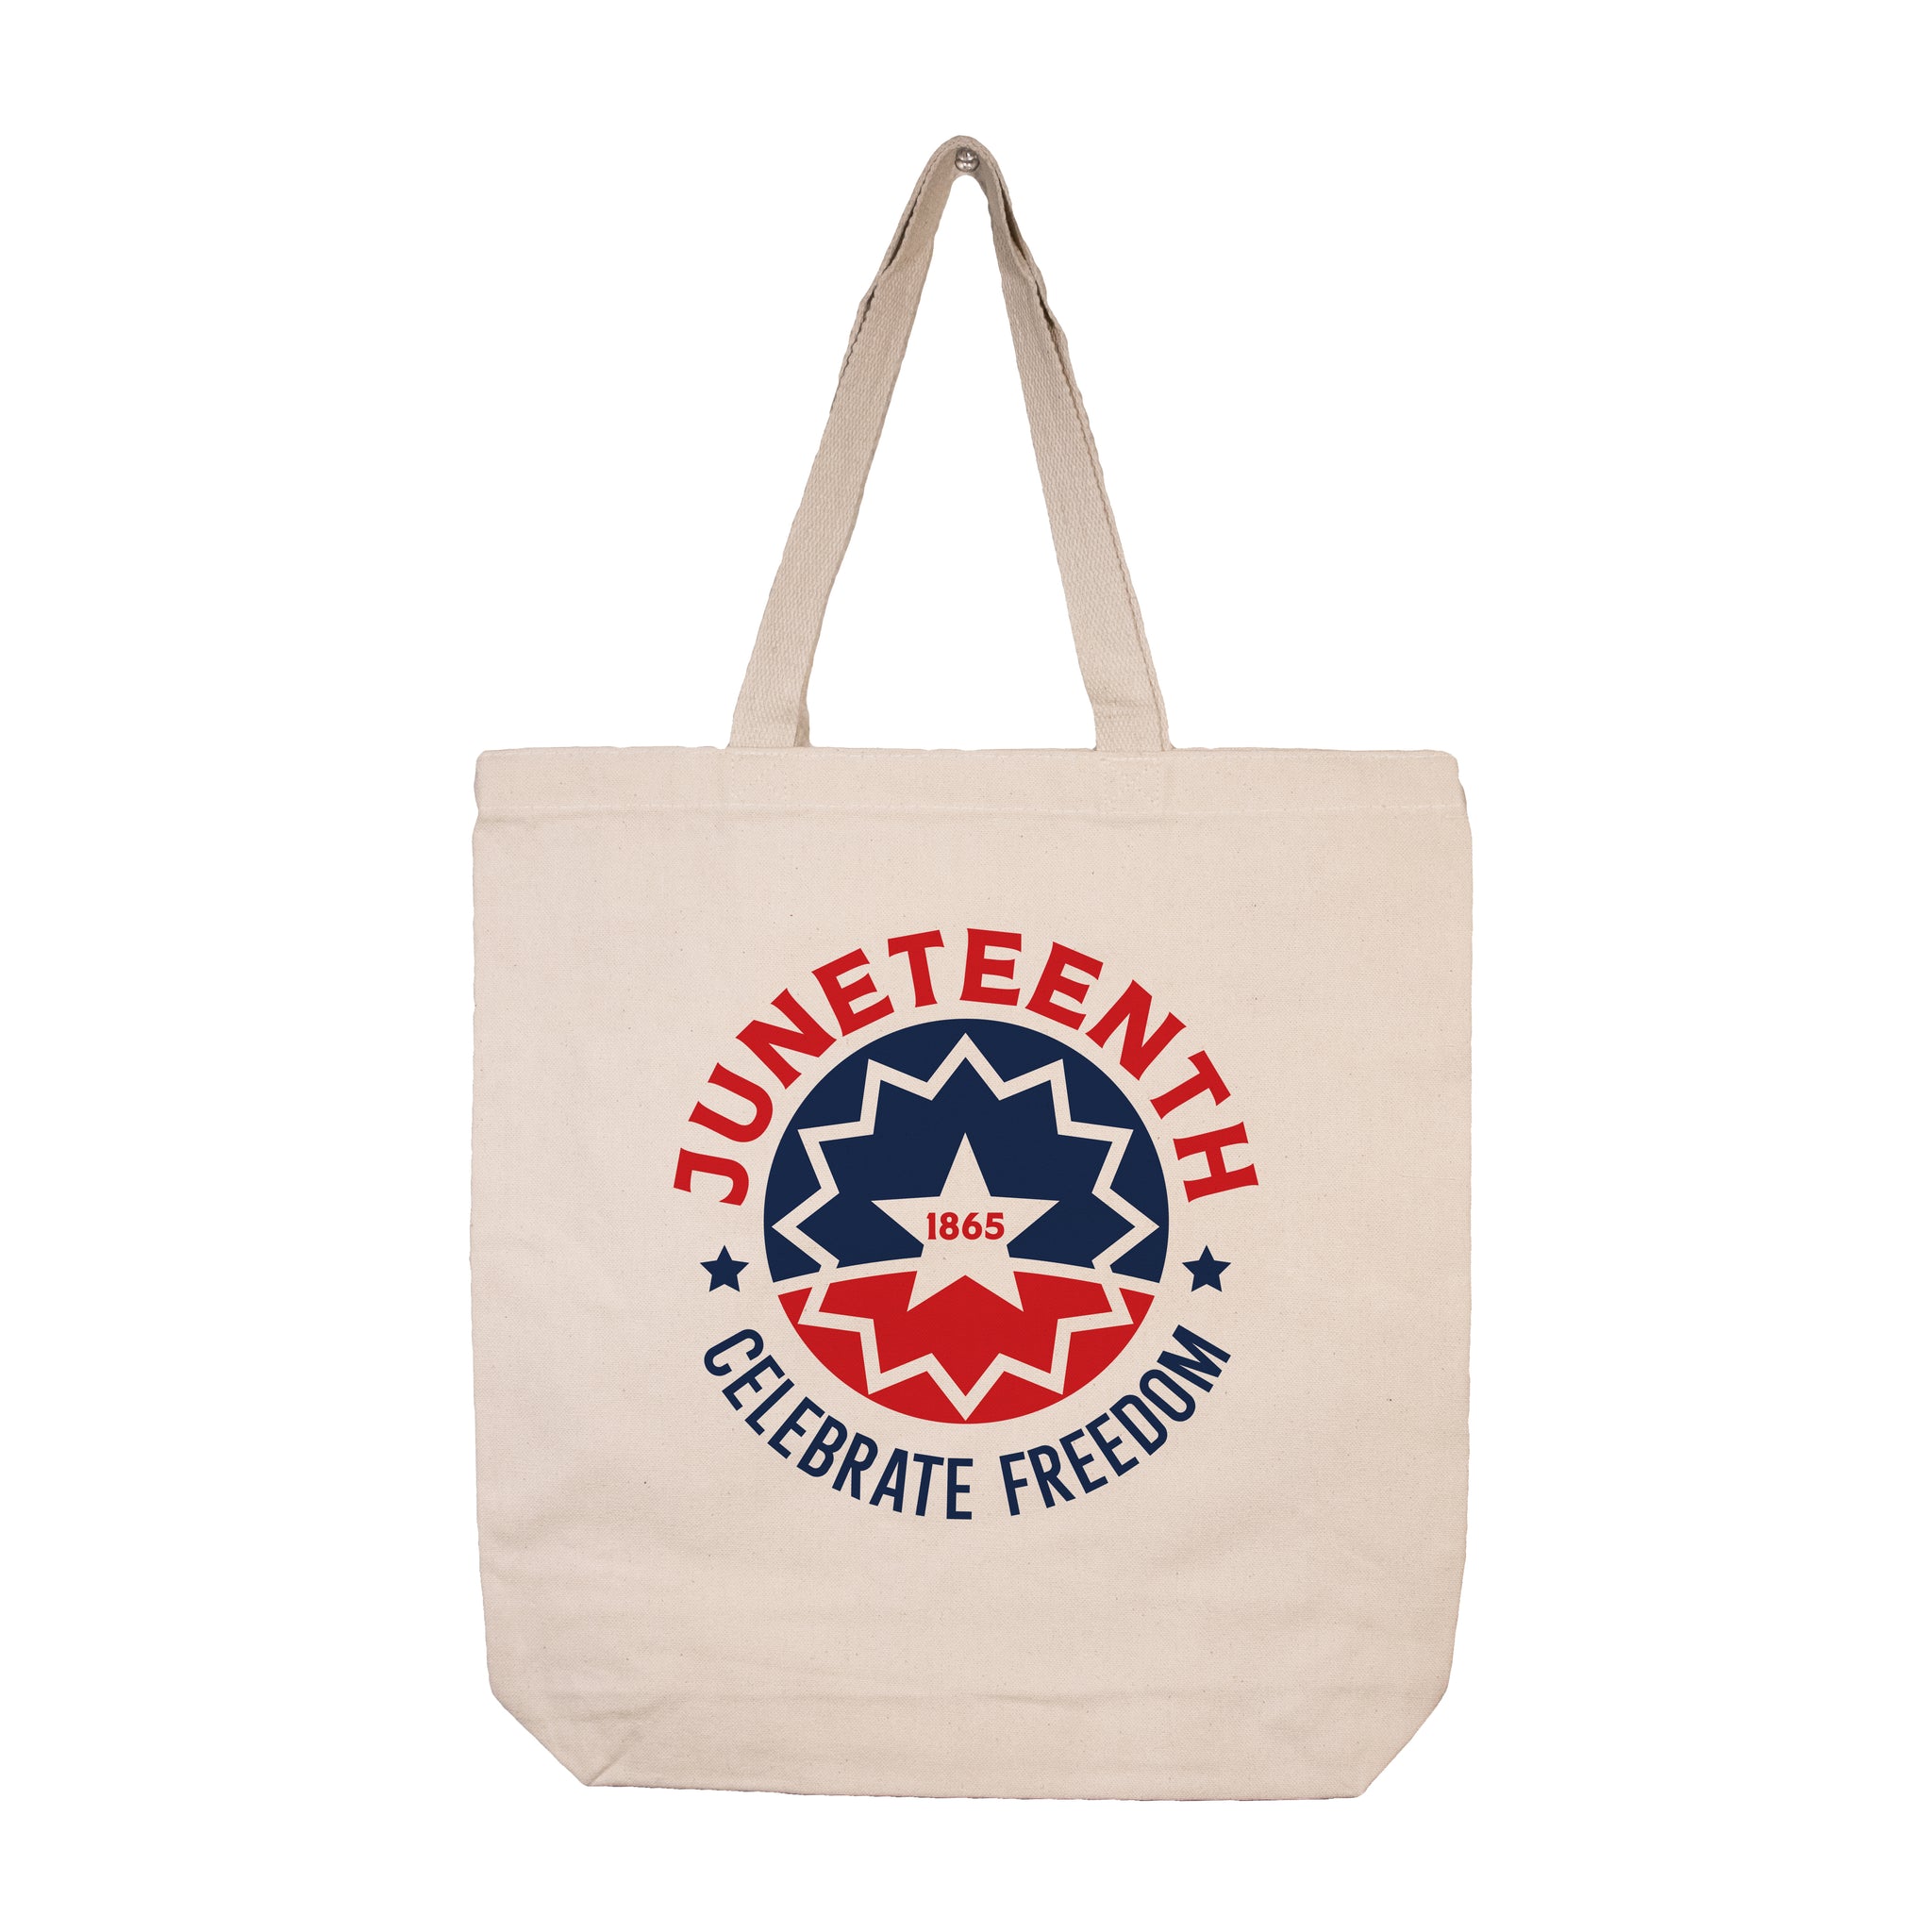 Juneteenth (Option 1) Tote